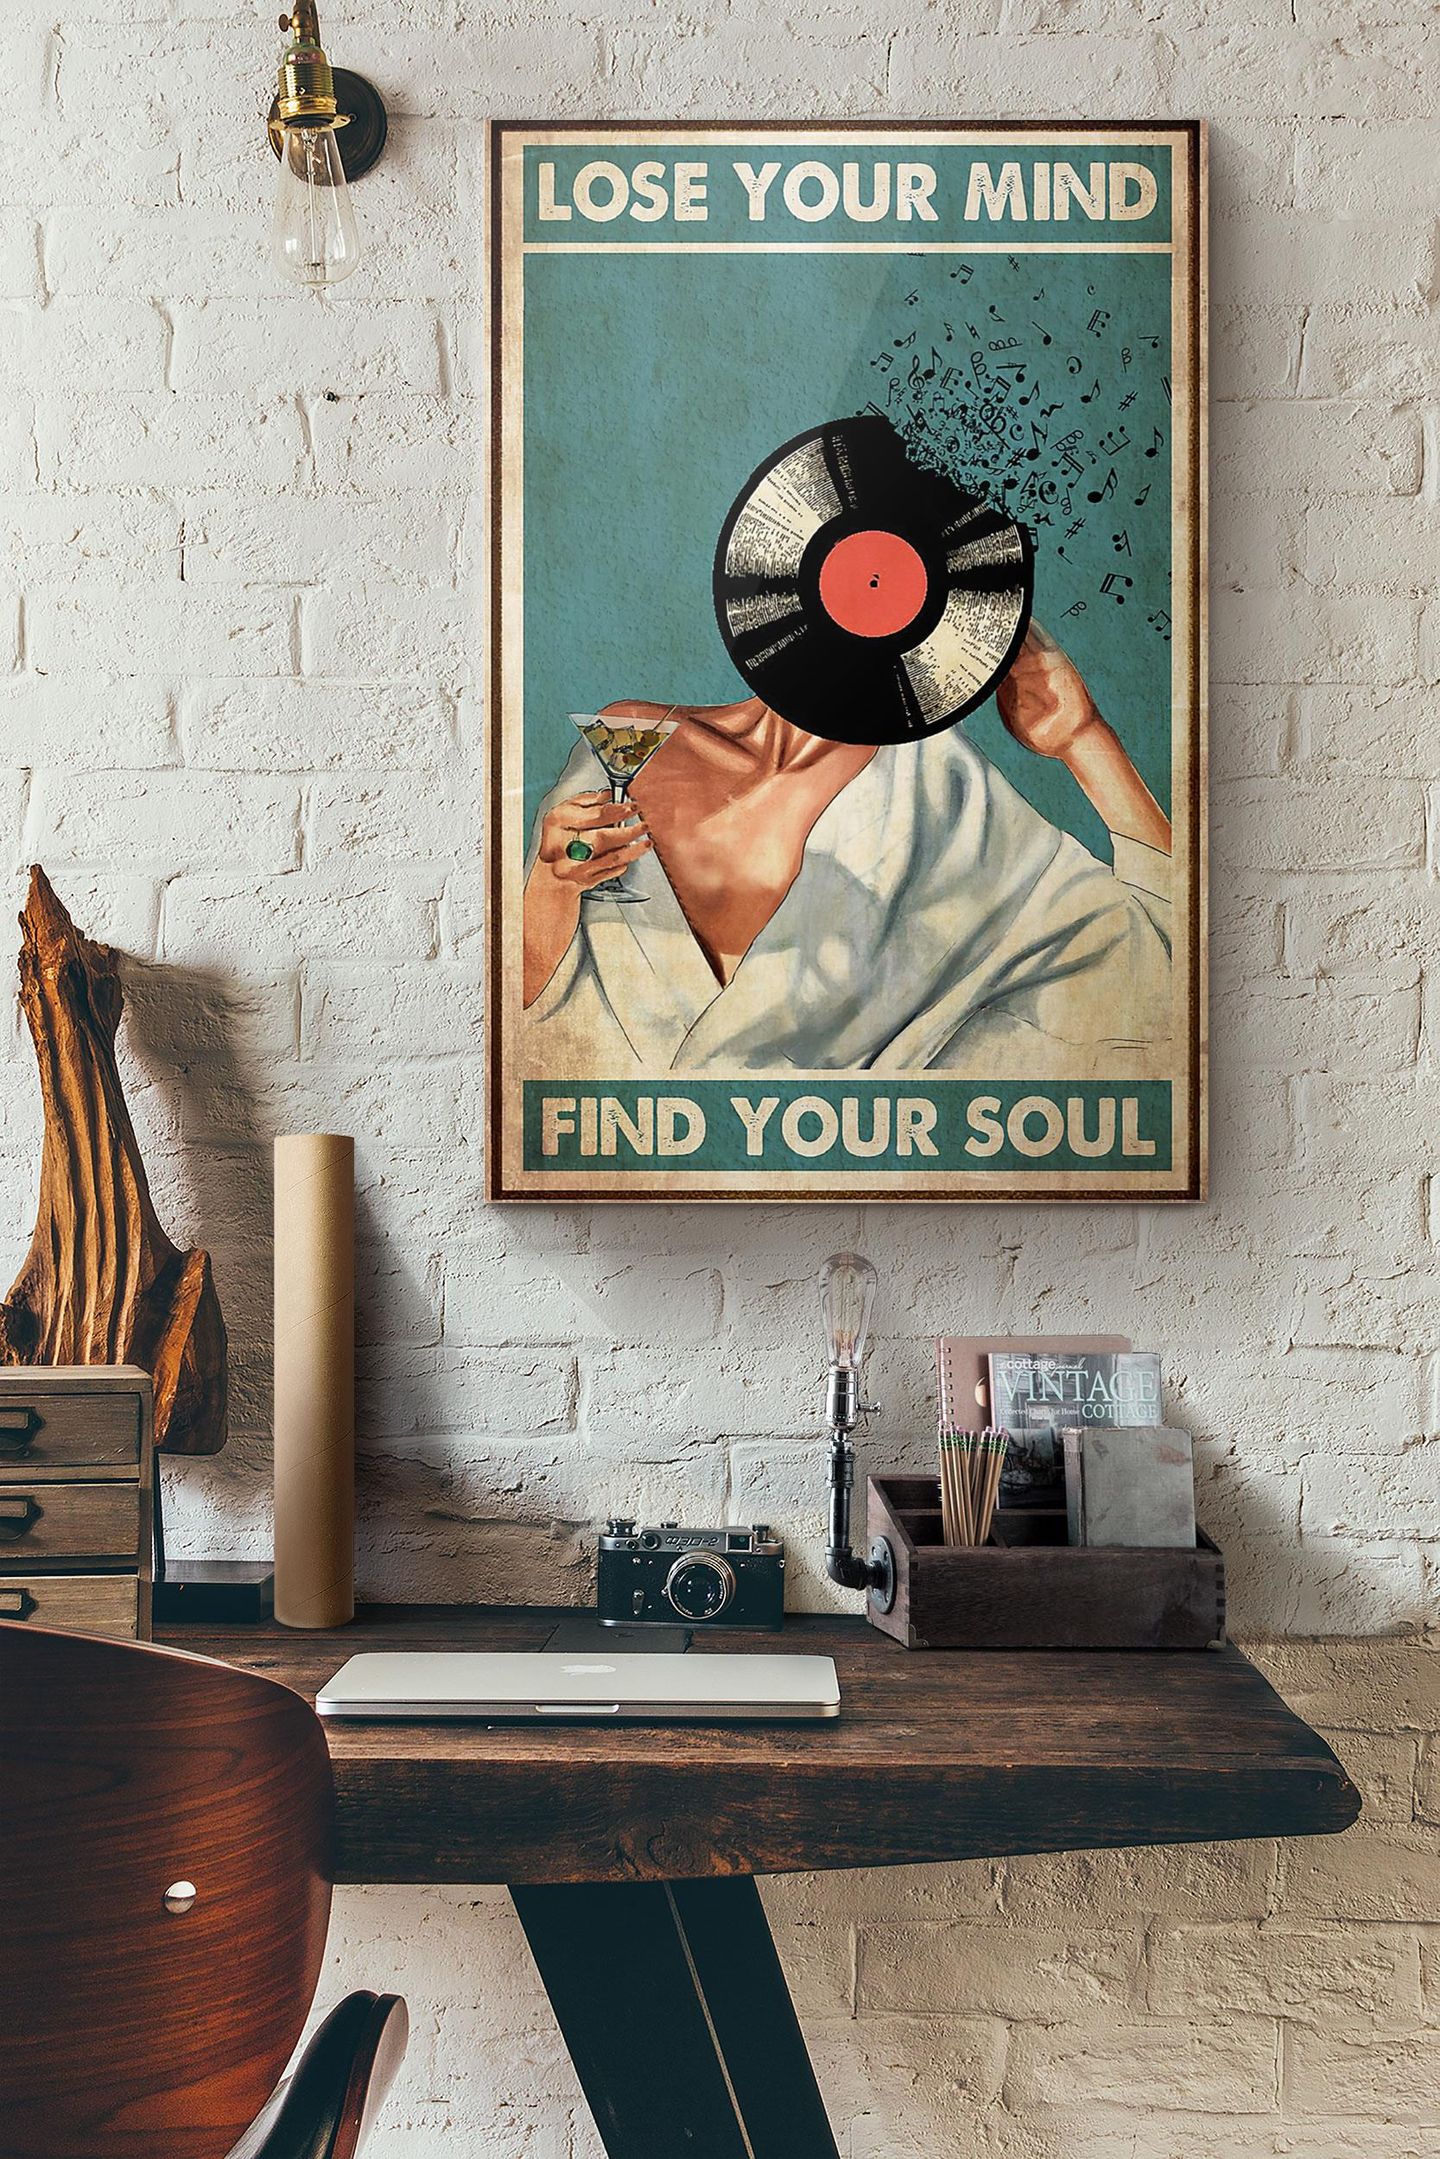 Girl Drink Wine Lose Your Mind Find Your Soul Poster